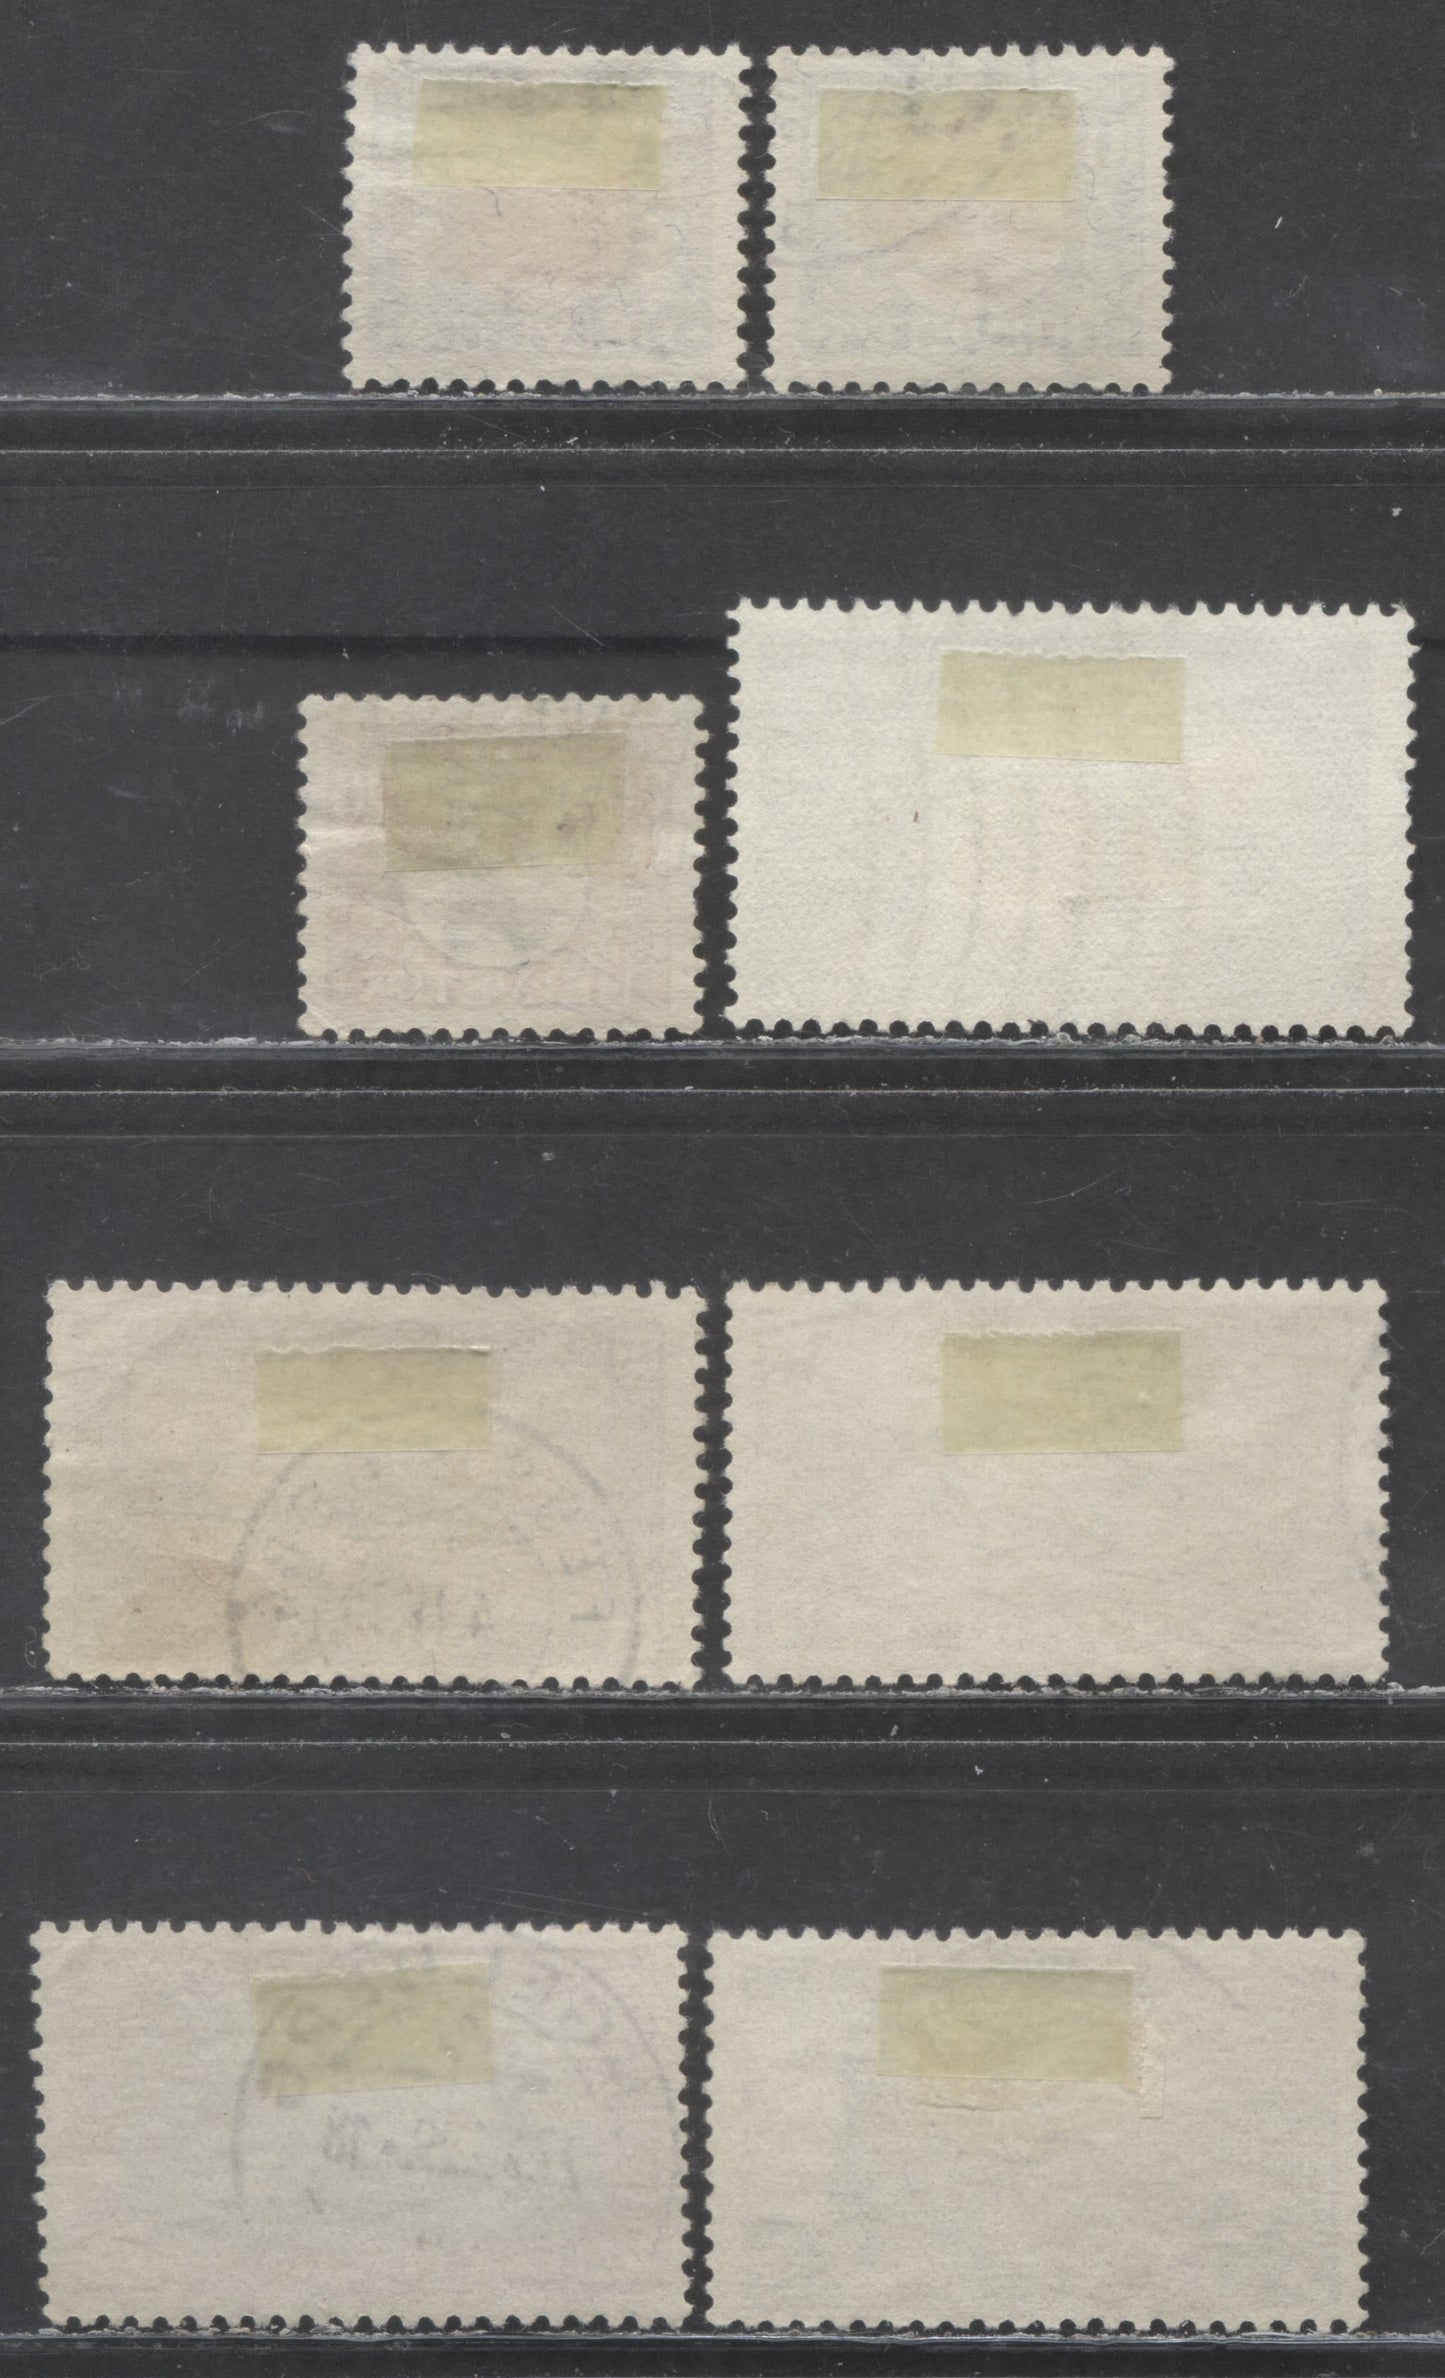 Lot 306 Switzerland SC#B45-B52 1928-1929 Semi Postals, 8 Fine/Very Fine Used Singles, Click on Listing to See ALL Pictures, 2022 Scott Classic Cat. $40.4 USD